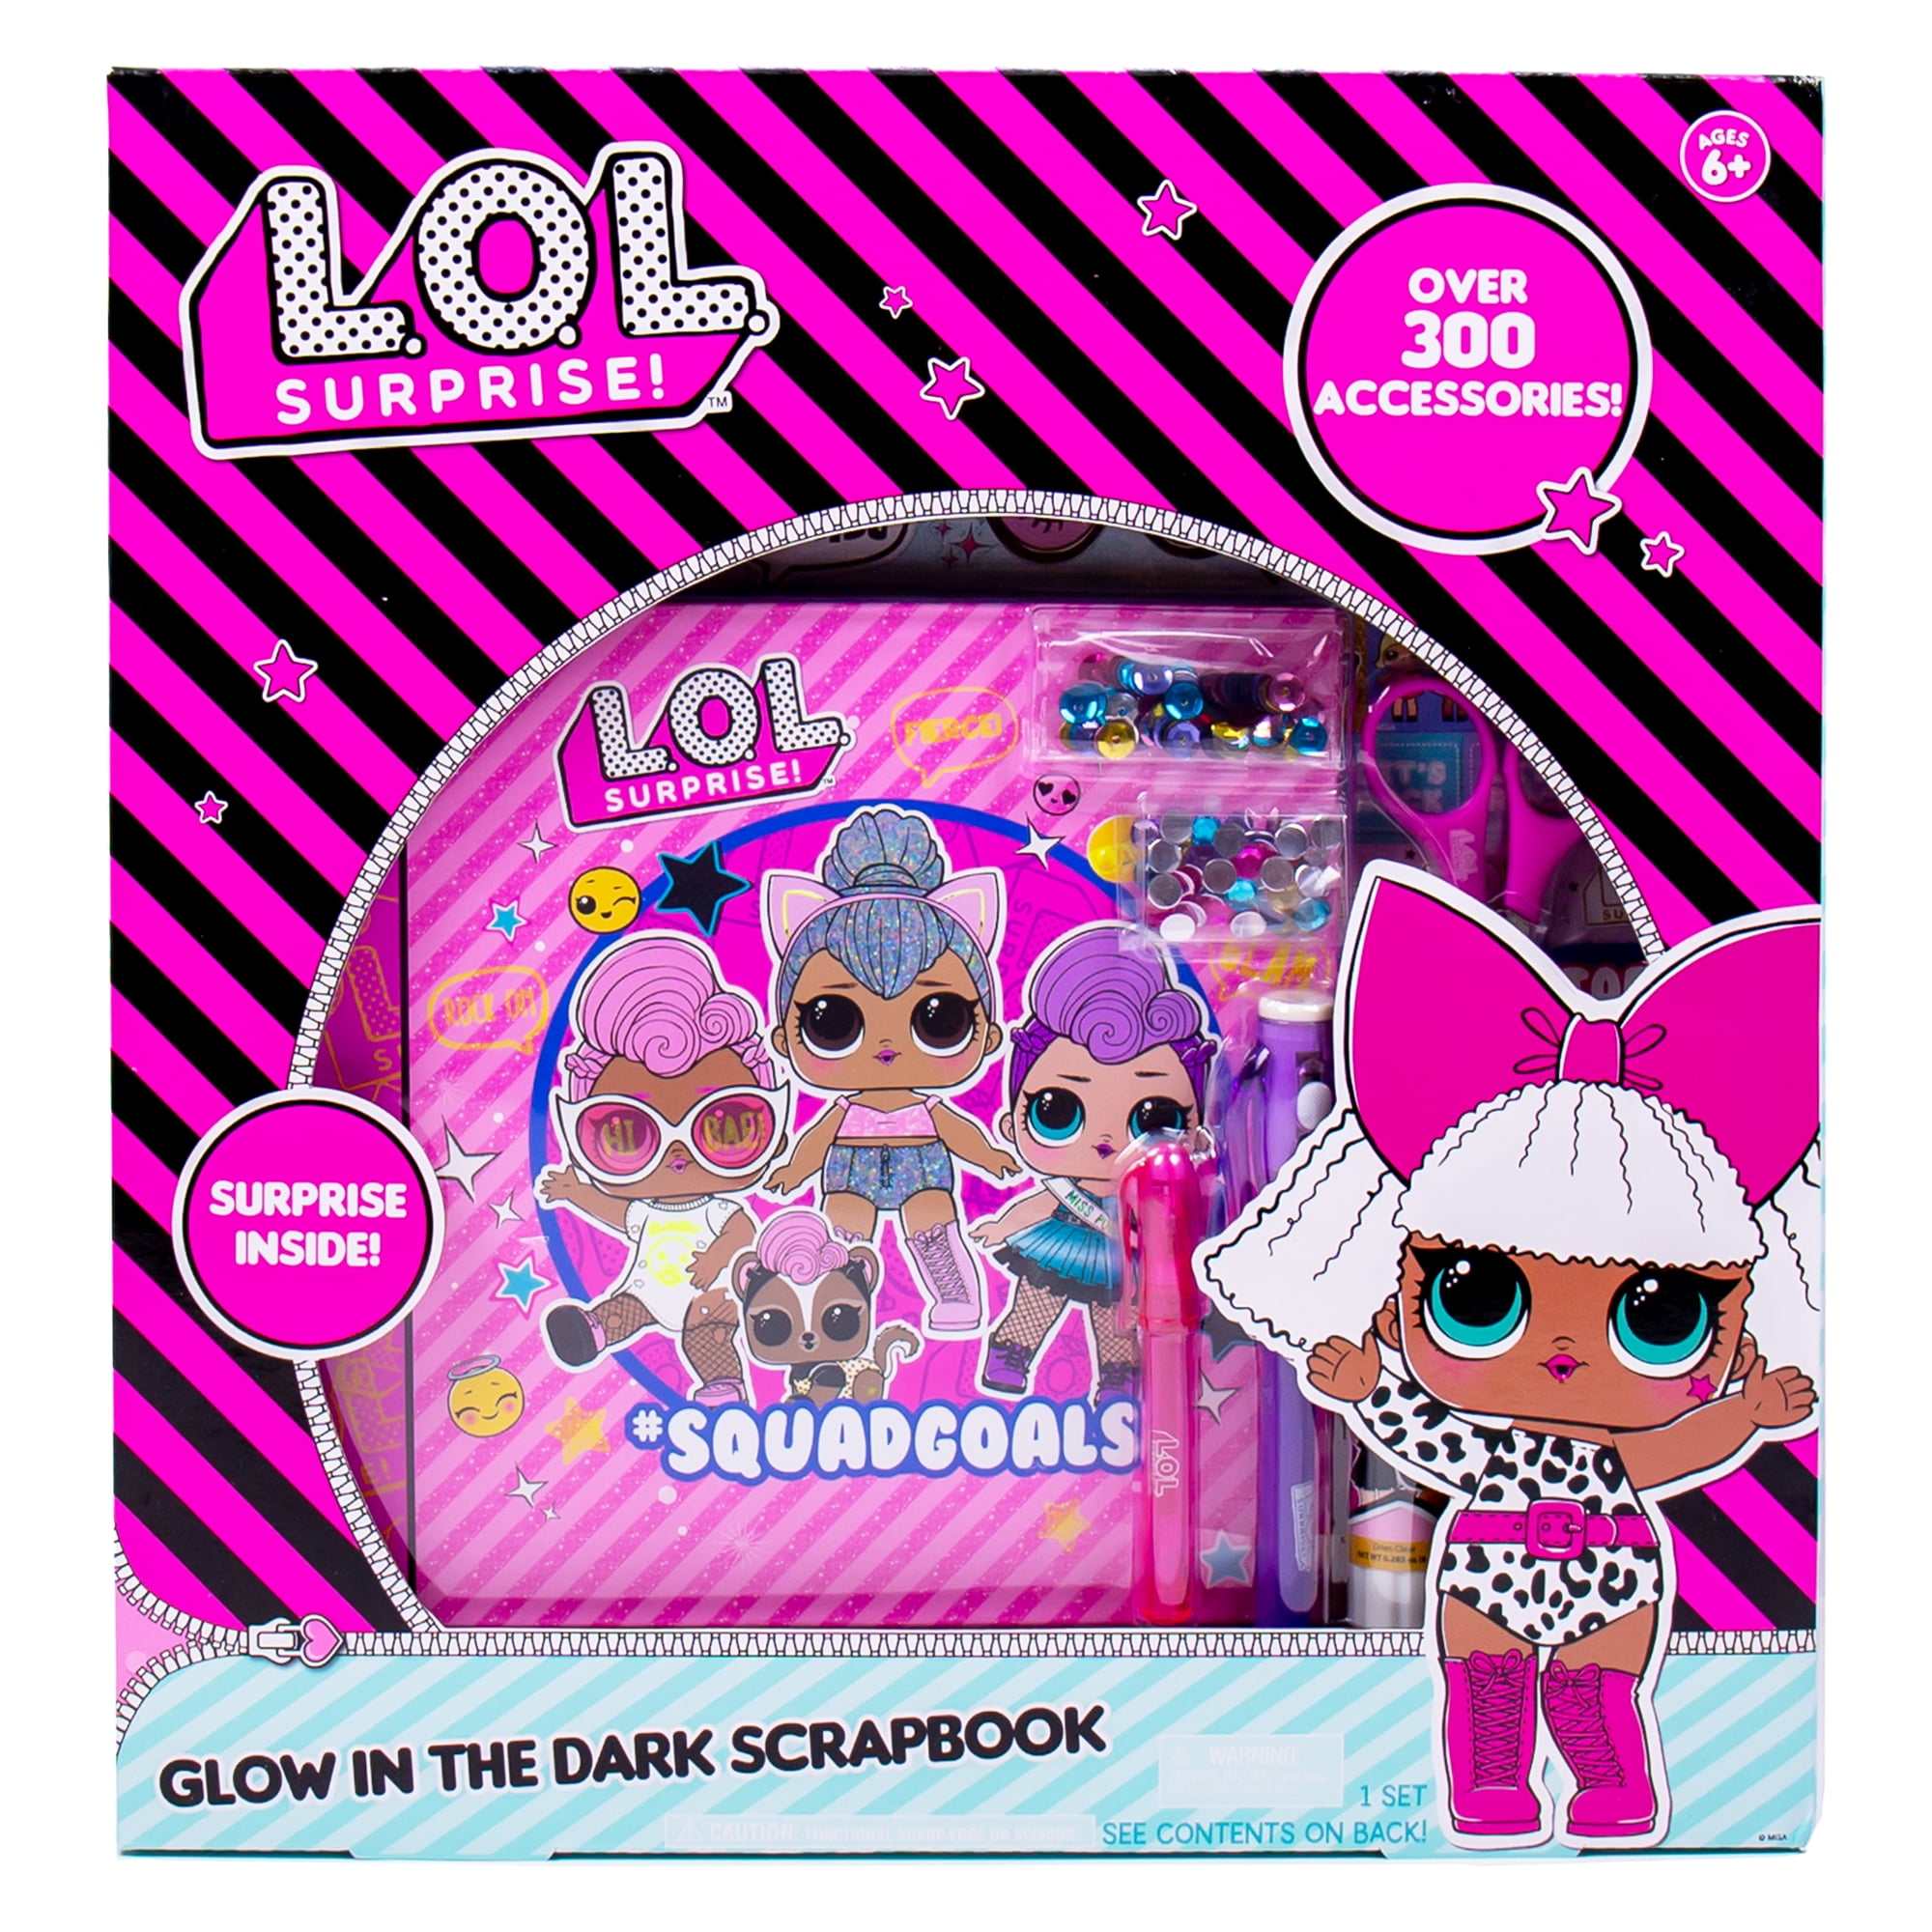 Surprise Glow-In-The-Dark Scrapbook by Horizon Group USA us toys HORCD 765940846599 L.O.L